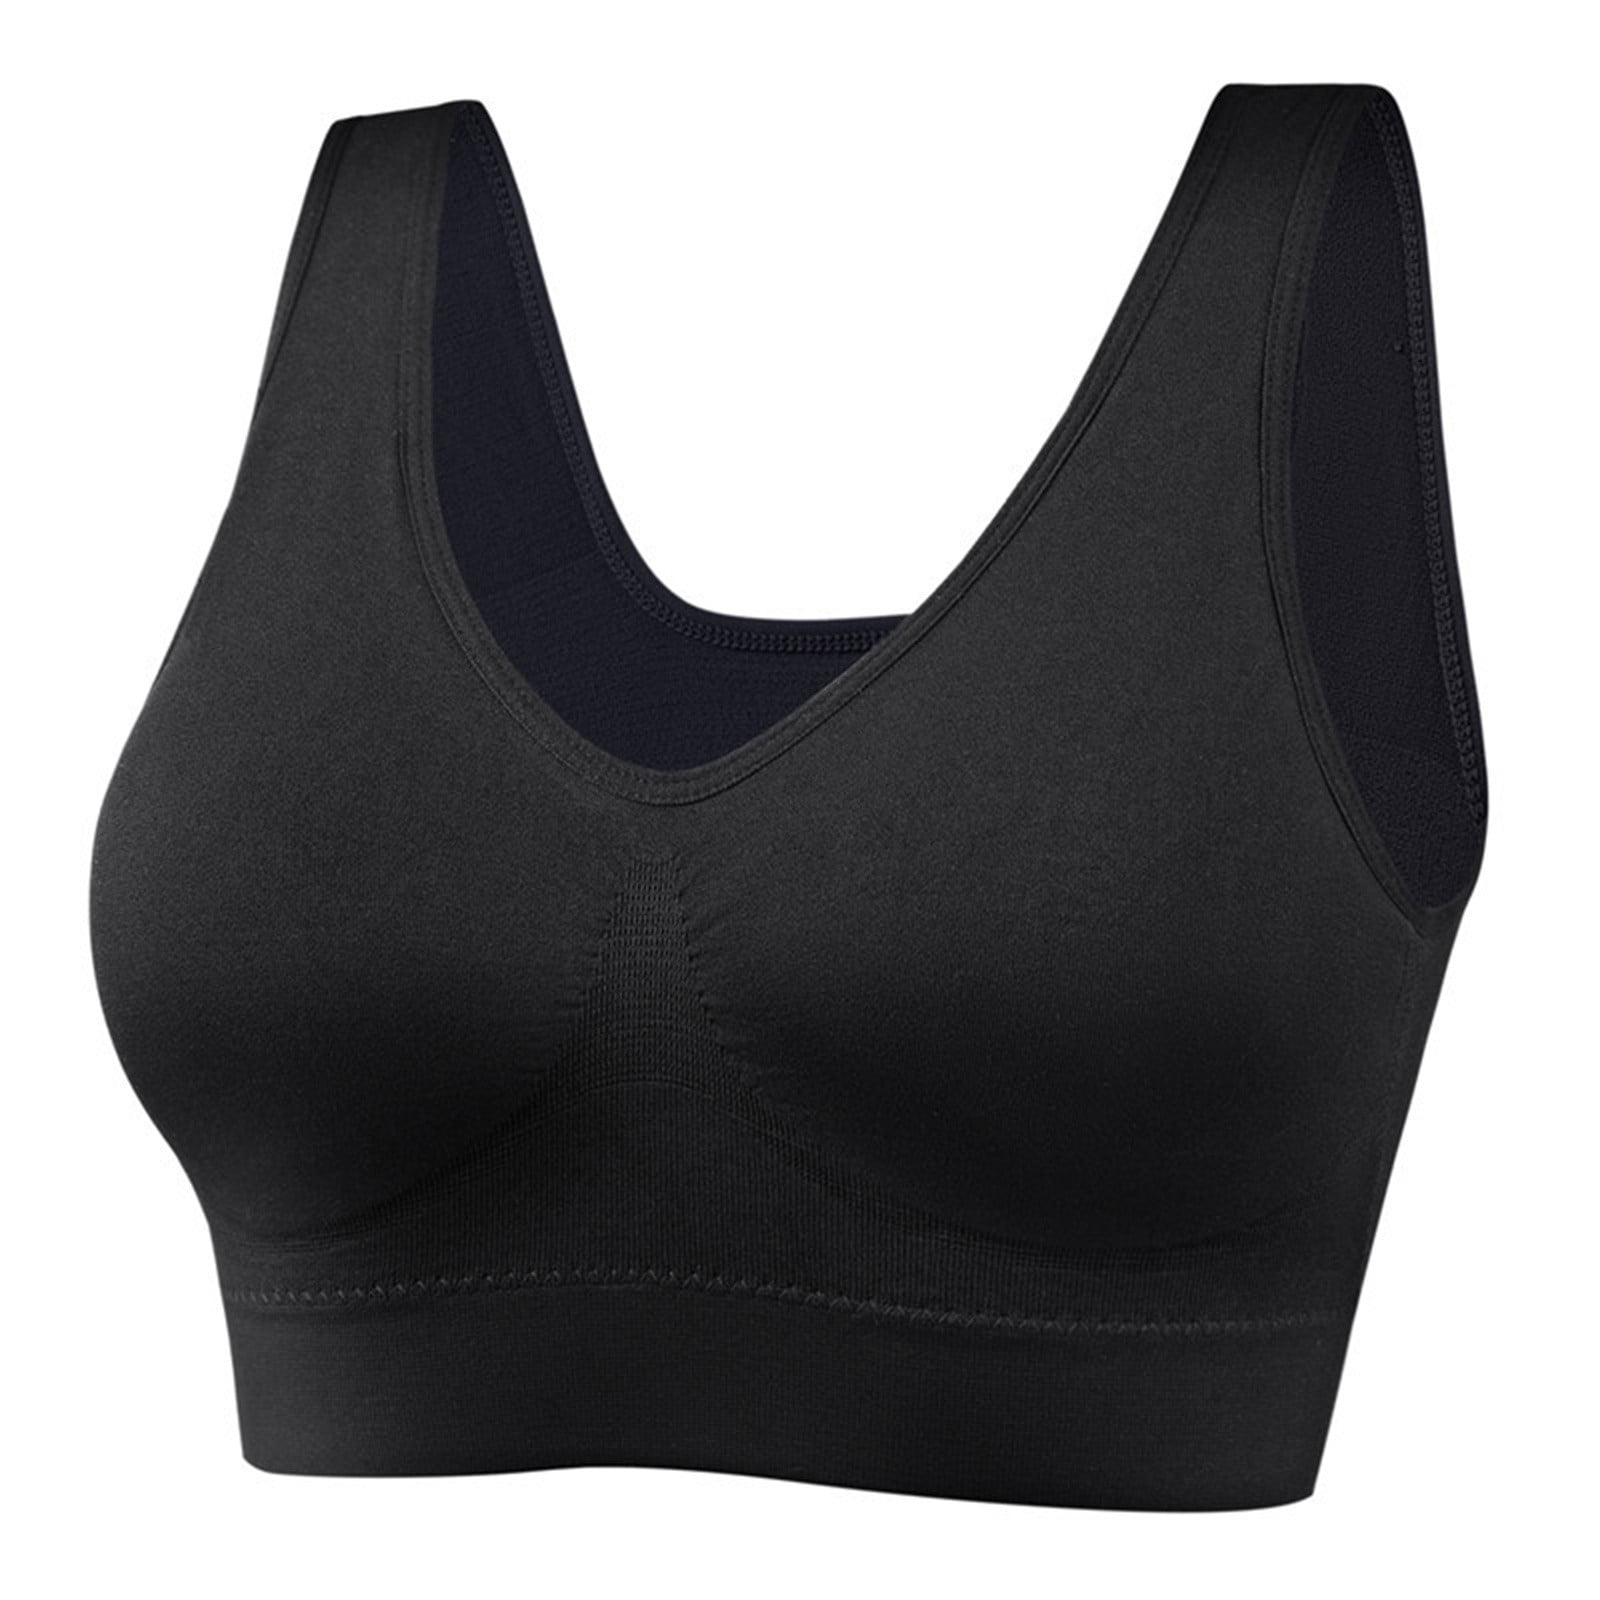 KDDYLITQ Push Up Bra for Women 42dd Seamless Women's Sports Bras Plus Size  Push Up Minimizer Bras for Women Wirefree Support Yoga T Shirt Bras for  Women No Underwire Complexion XL 